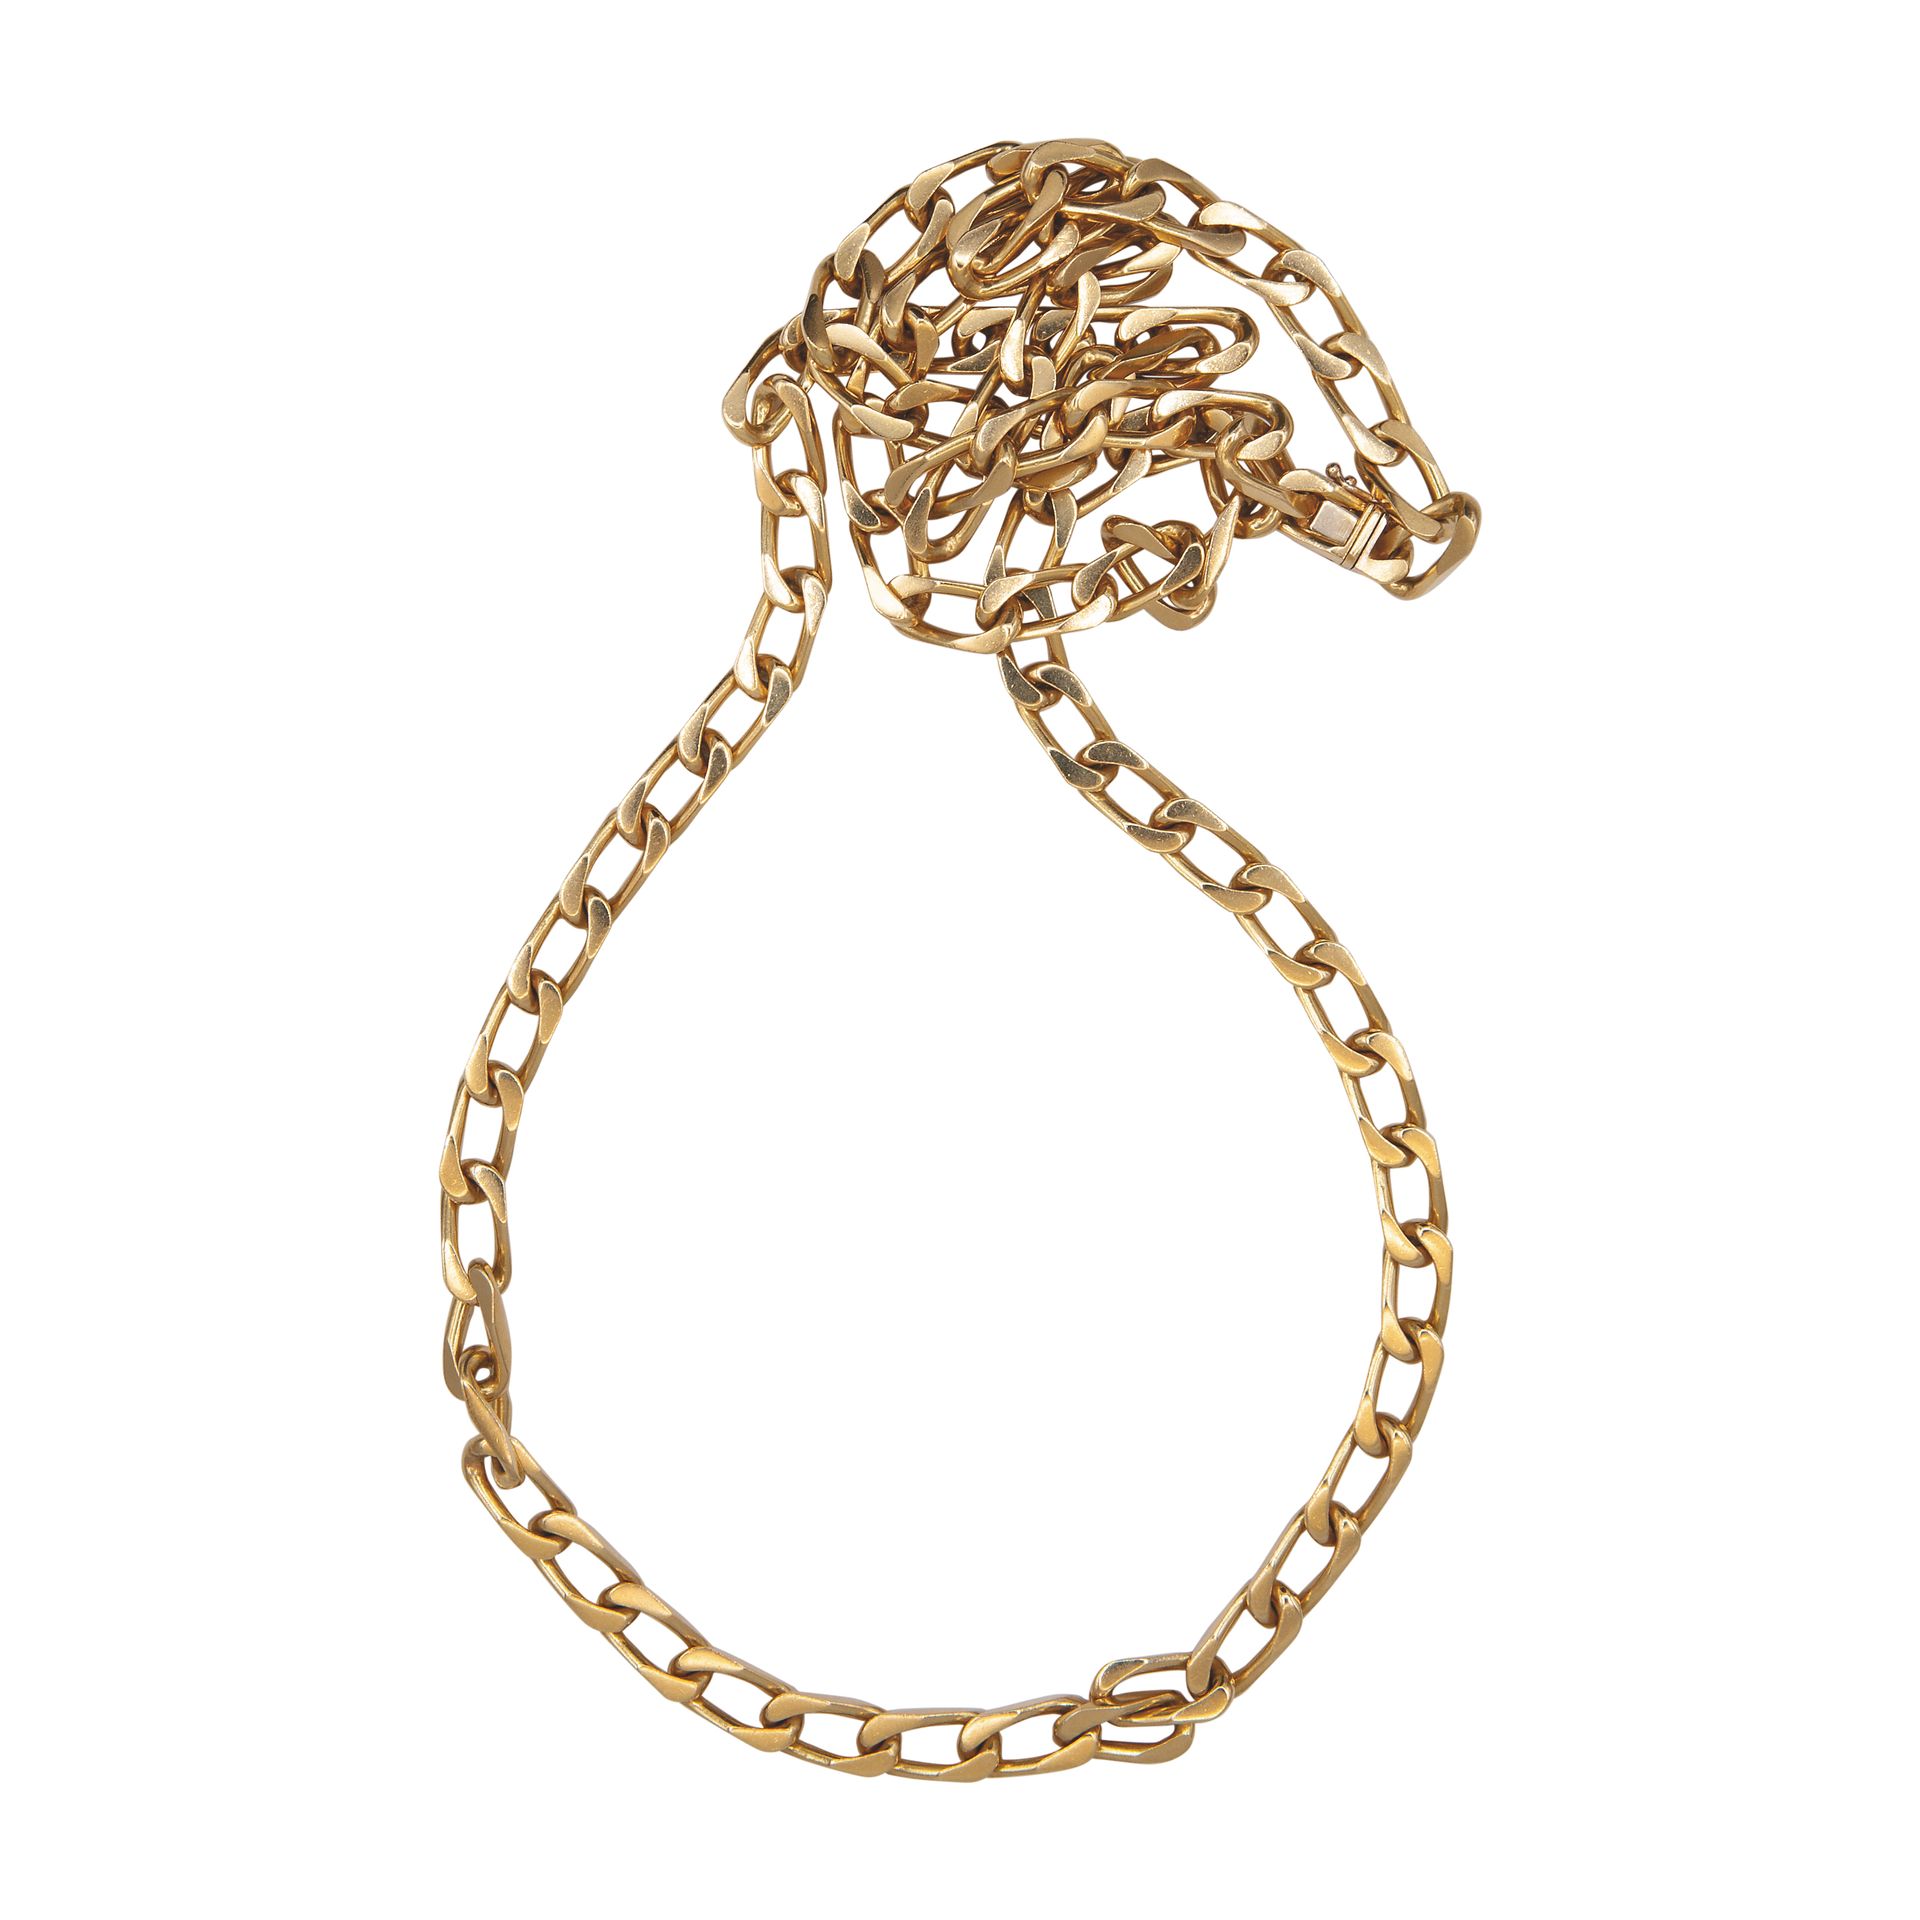 Null Gourmette necklace in 18k yellow gold, length 42 cm, total weight 161.1 gr